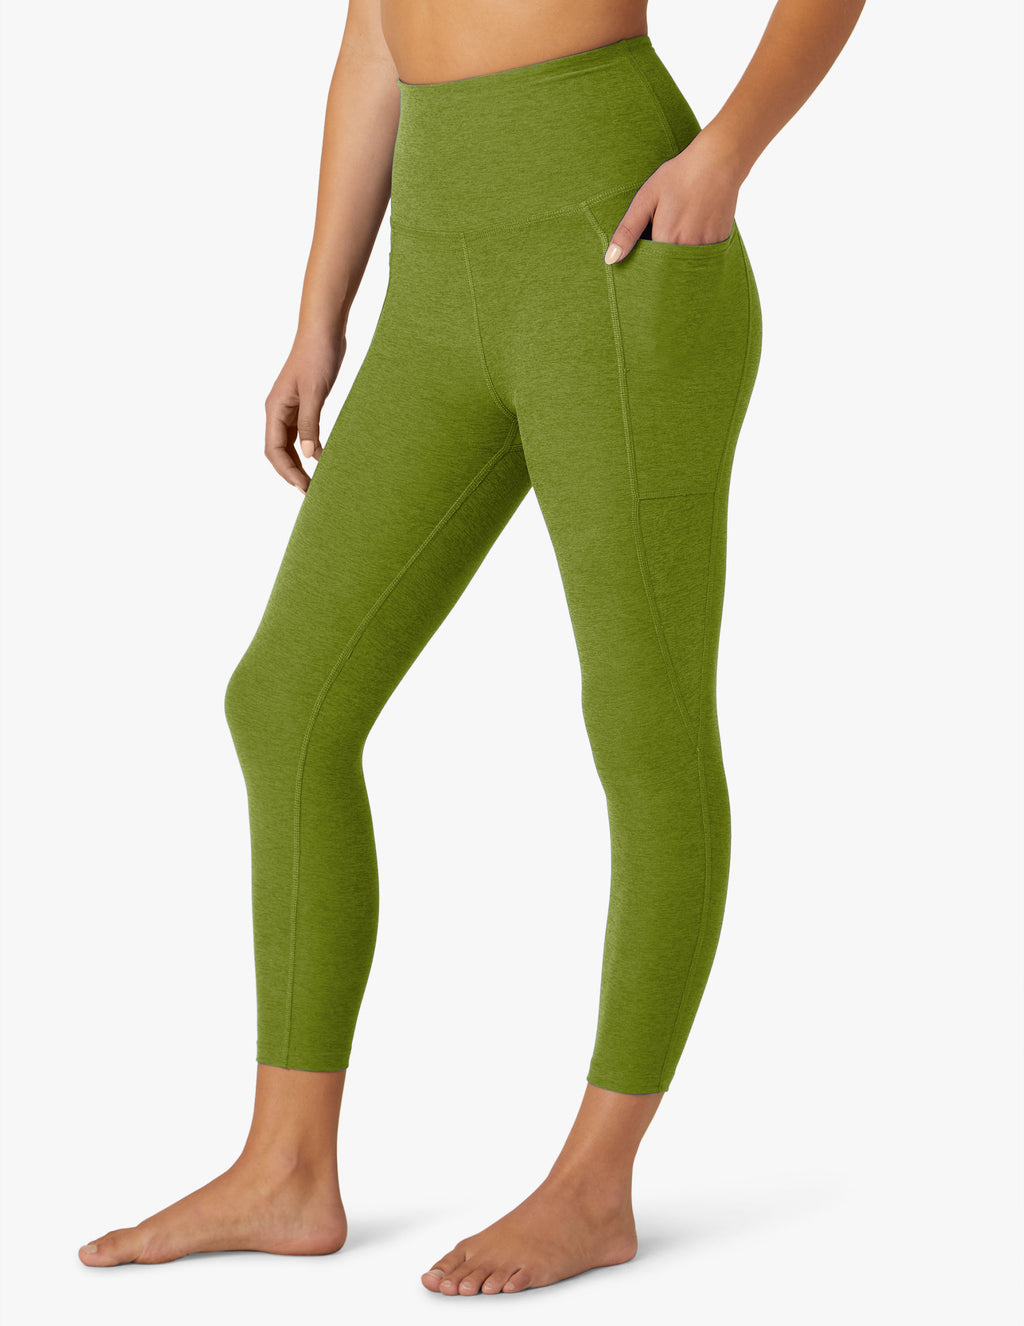 Spacedye Out Of Pocket High Waisted Capri Legging Featured Image